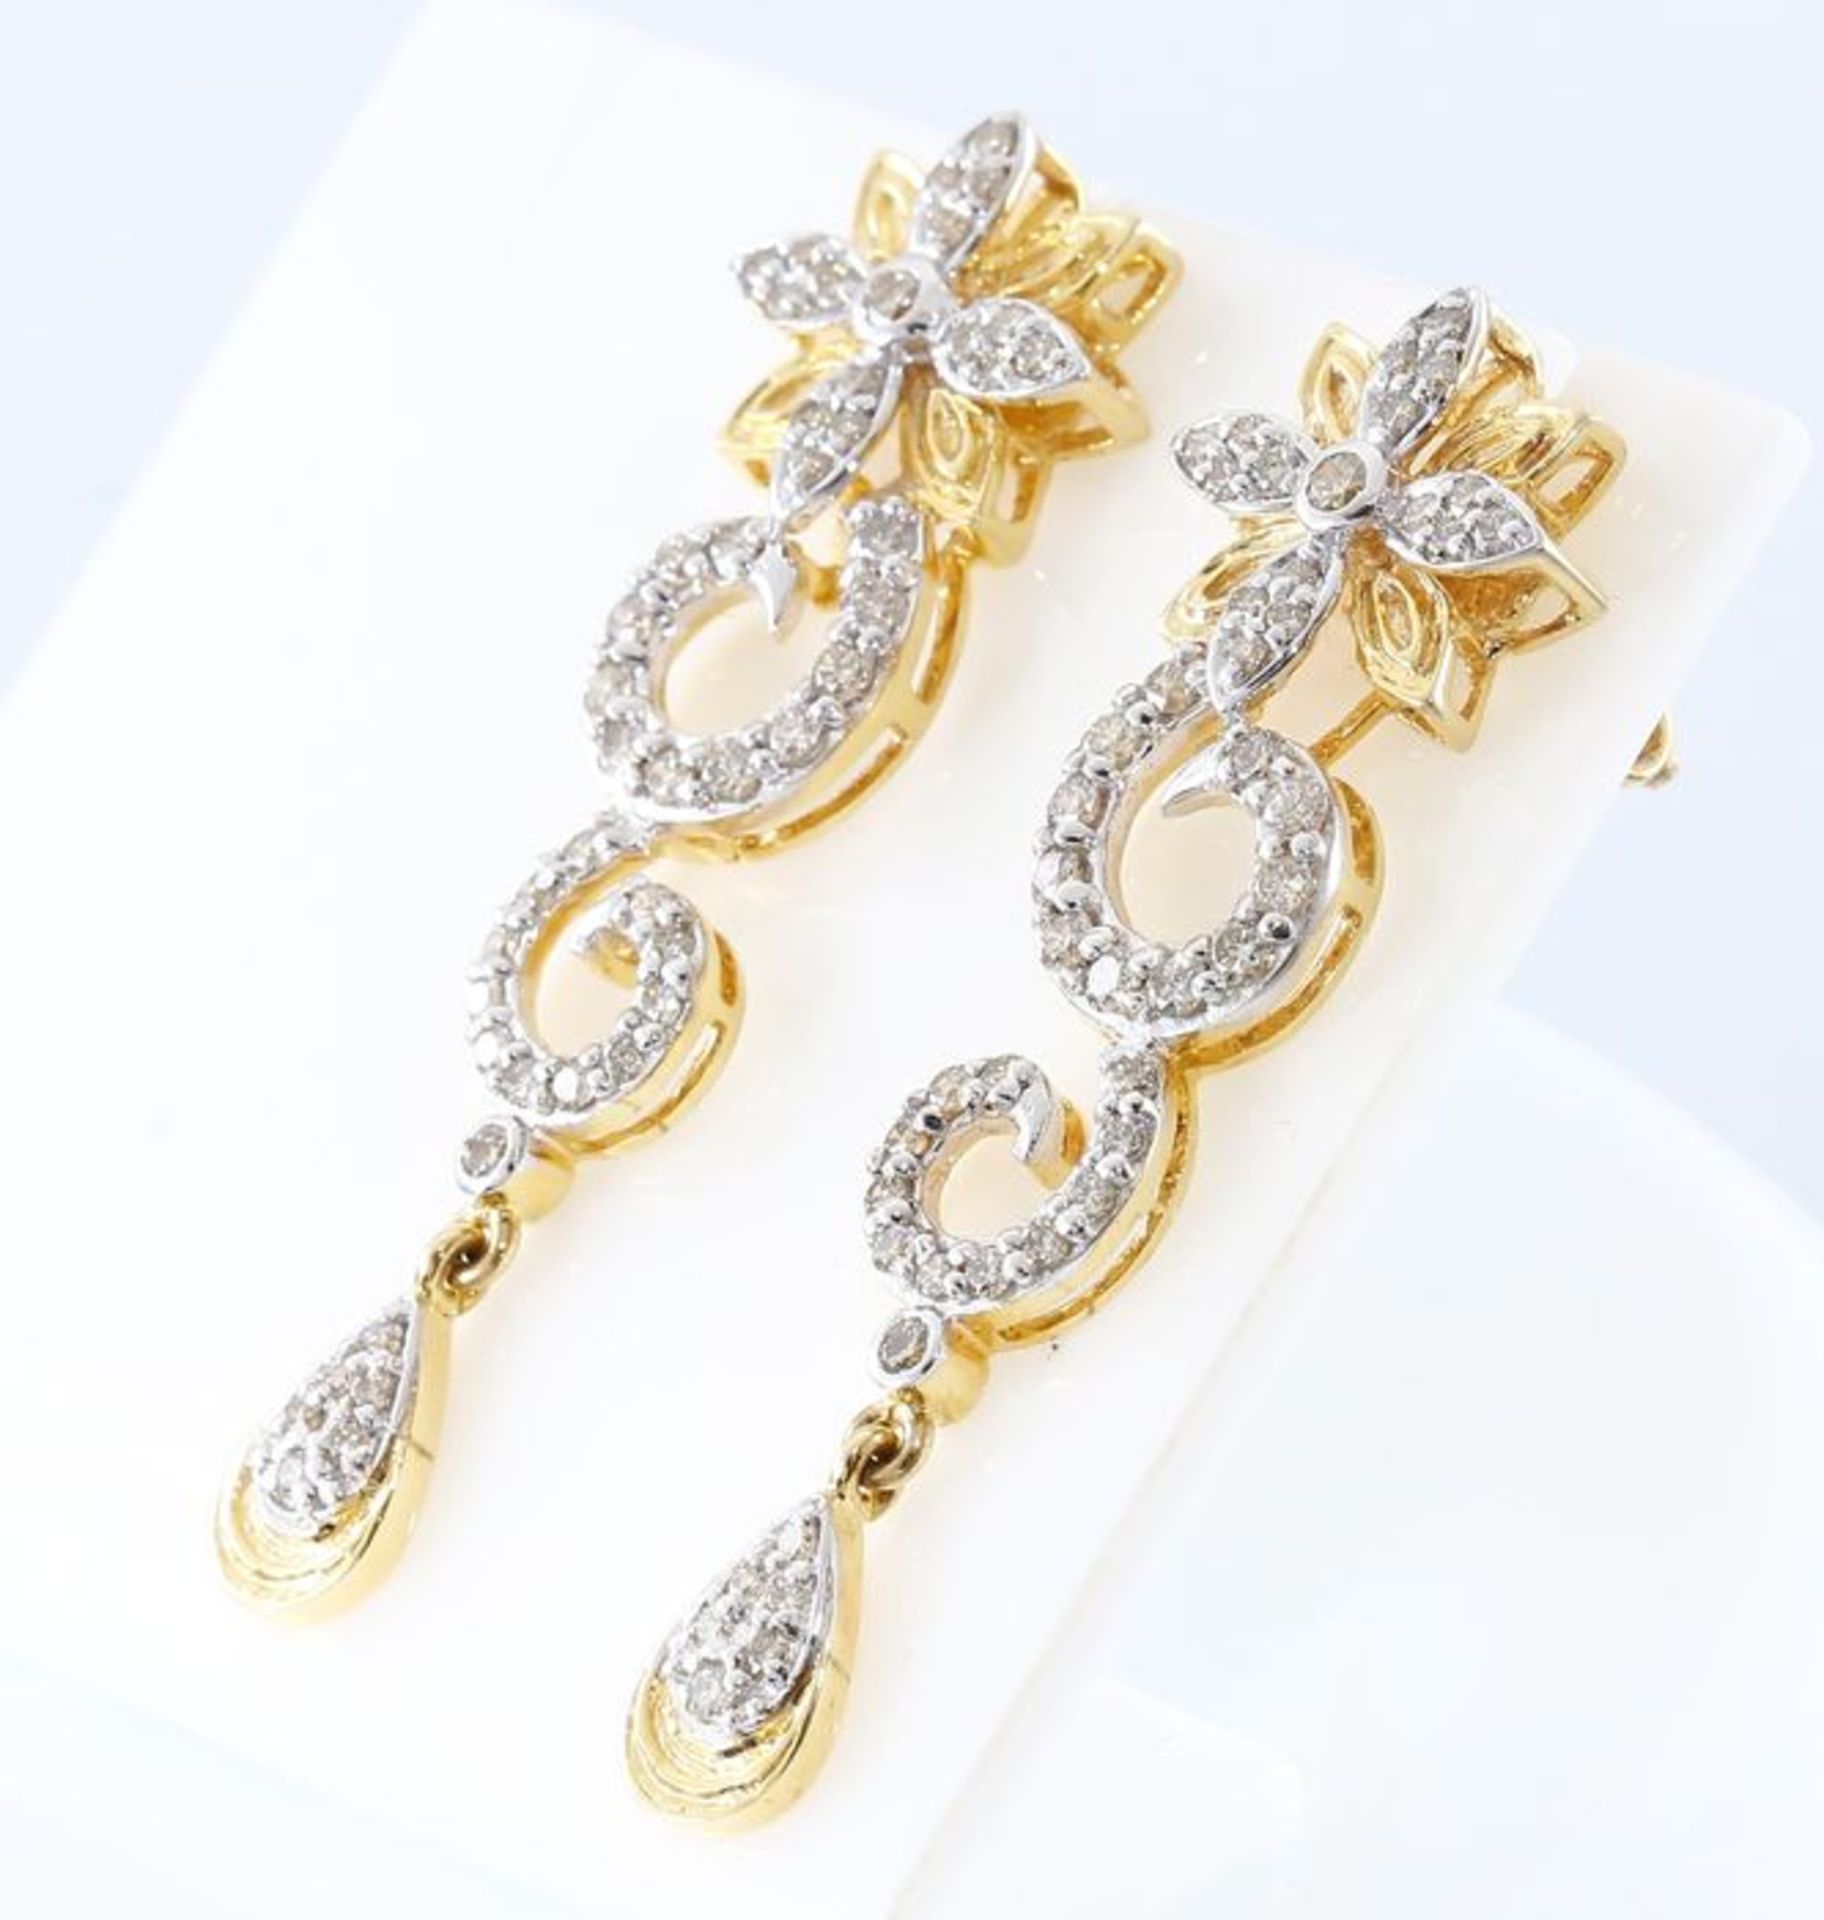 IGI Certified 14 K / 585 Yellow Gold Diamond Necklace with Matching Chandelier Earrings - Image 7 of 8